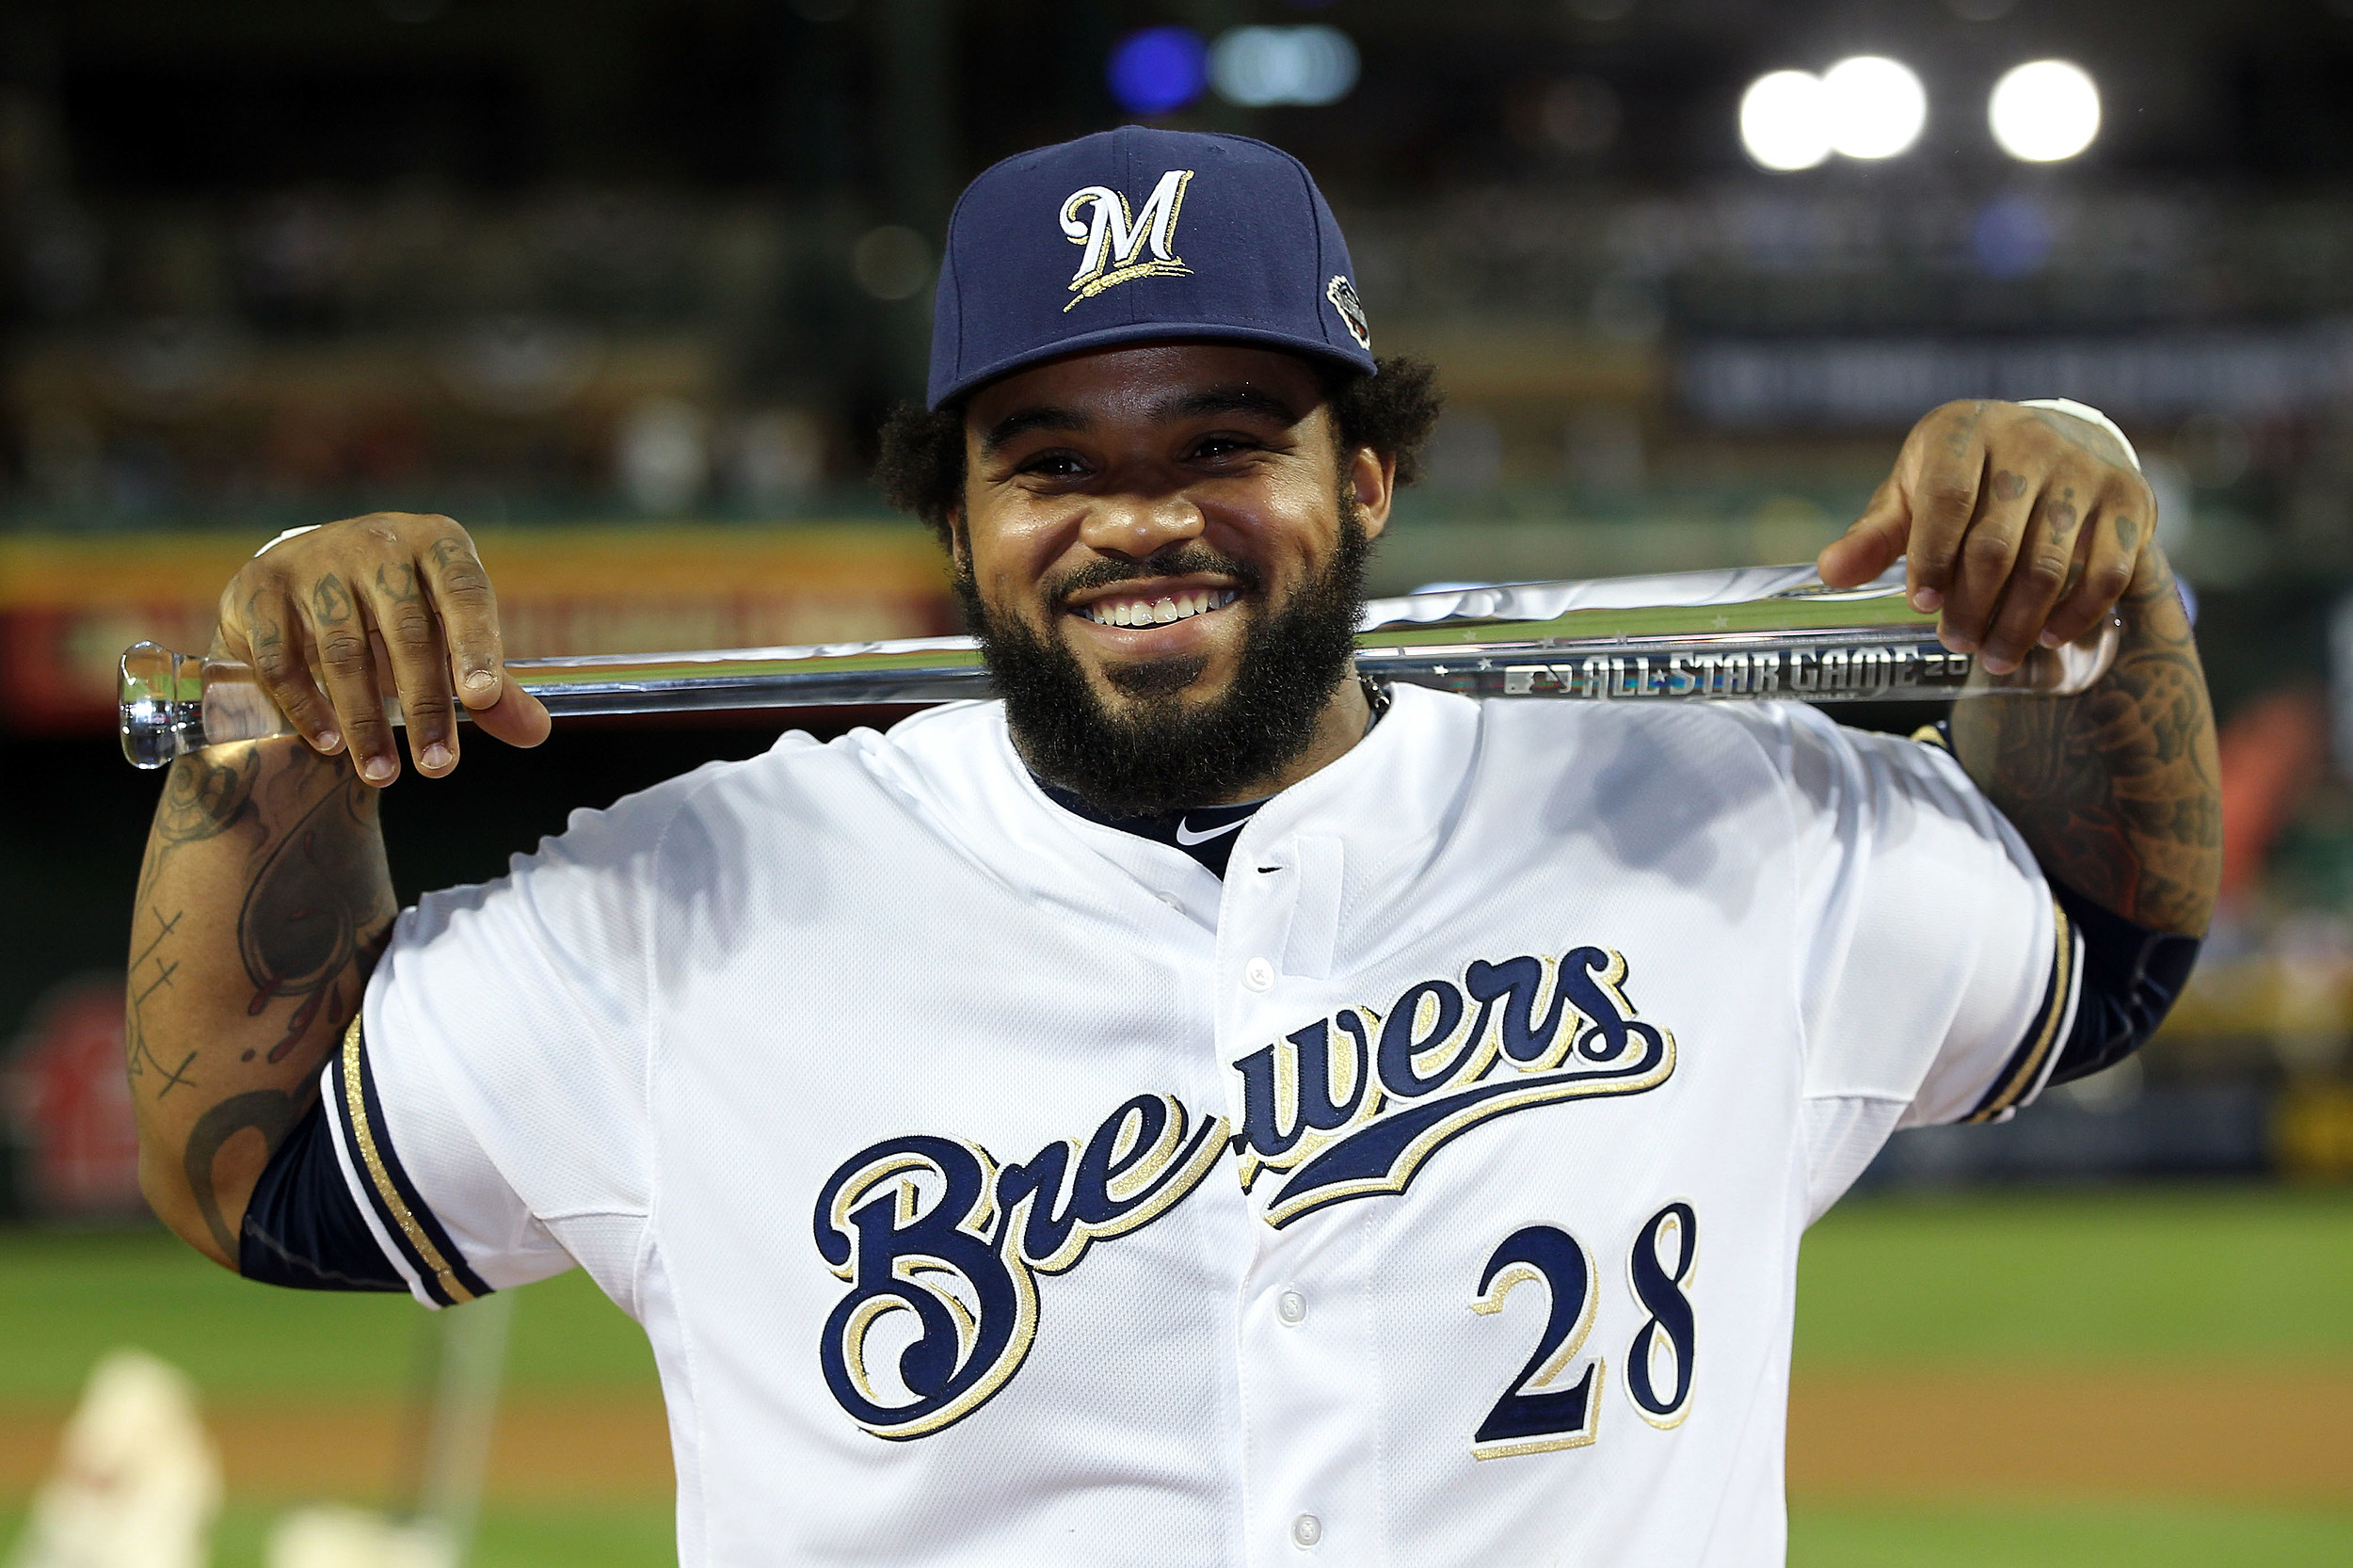 Brewers Charity Auction: Prince Fielder 2011 All Star Home White